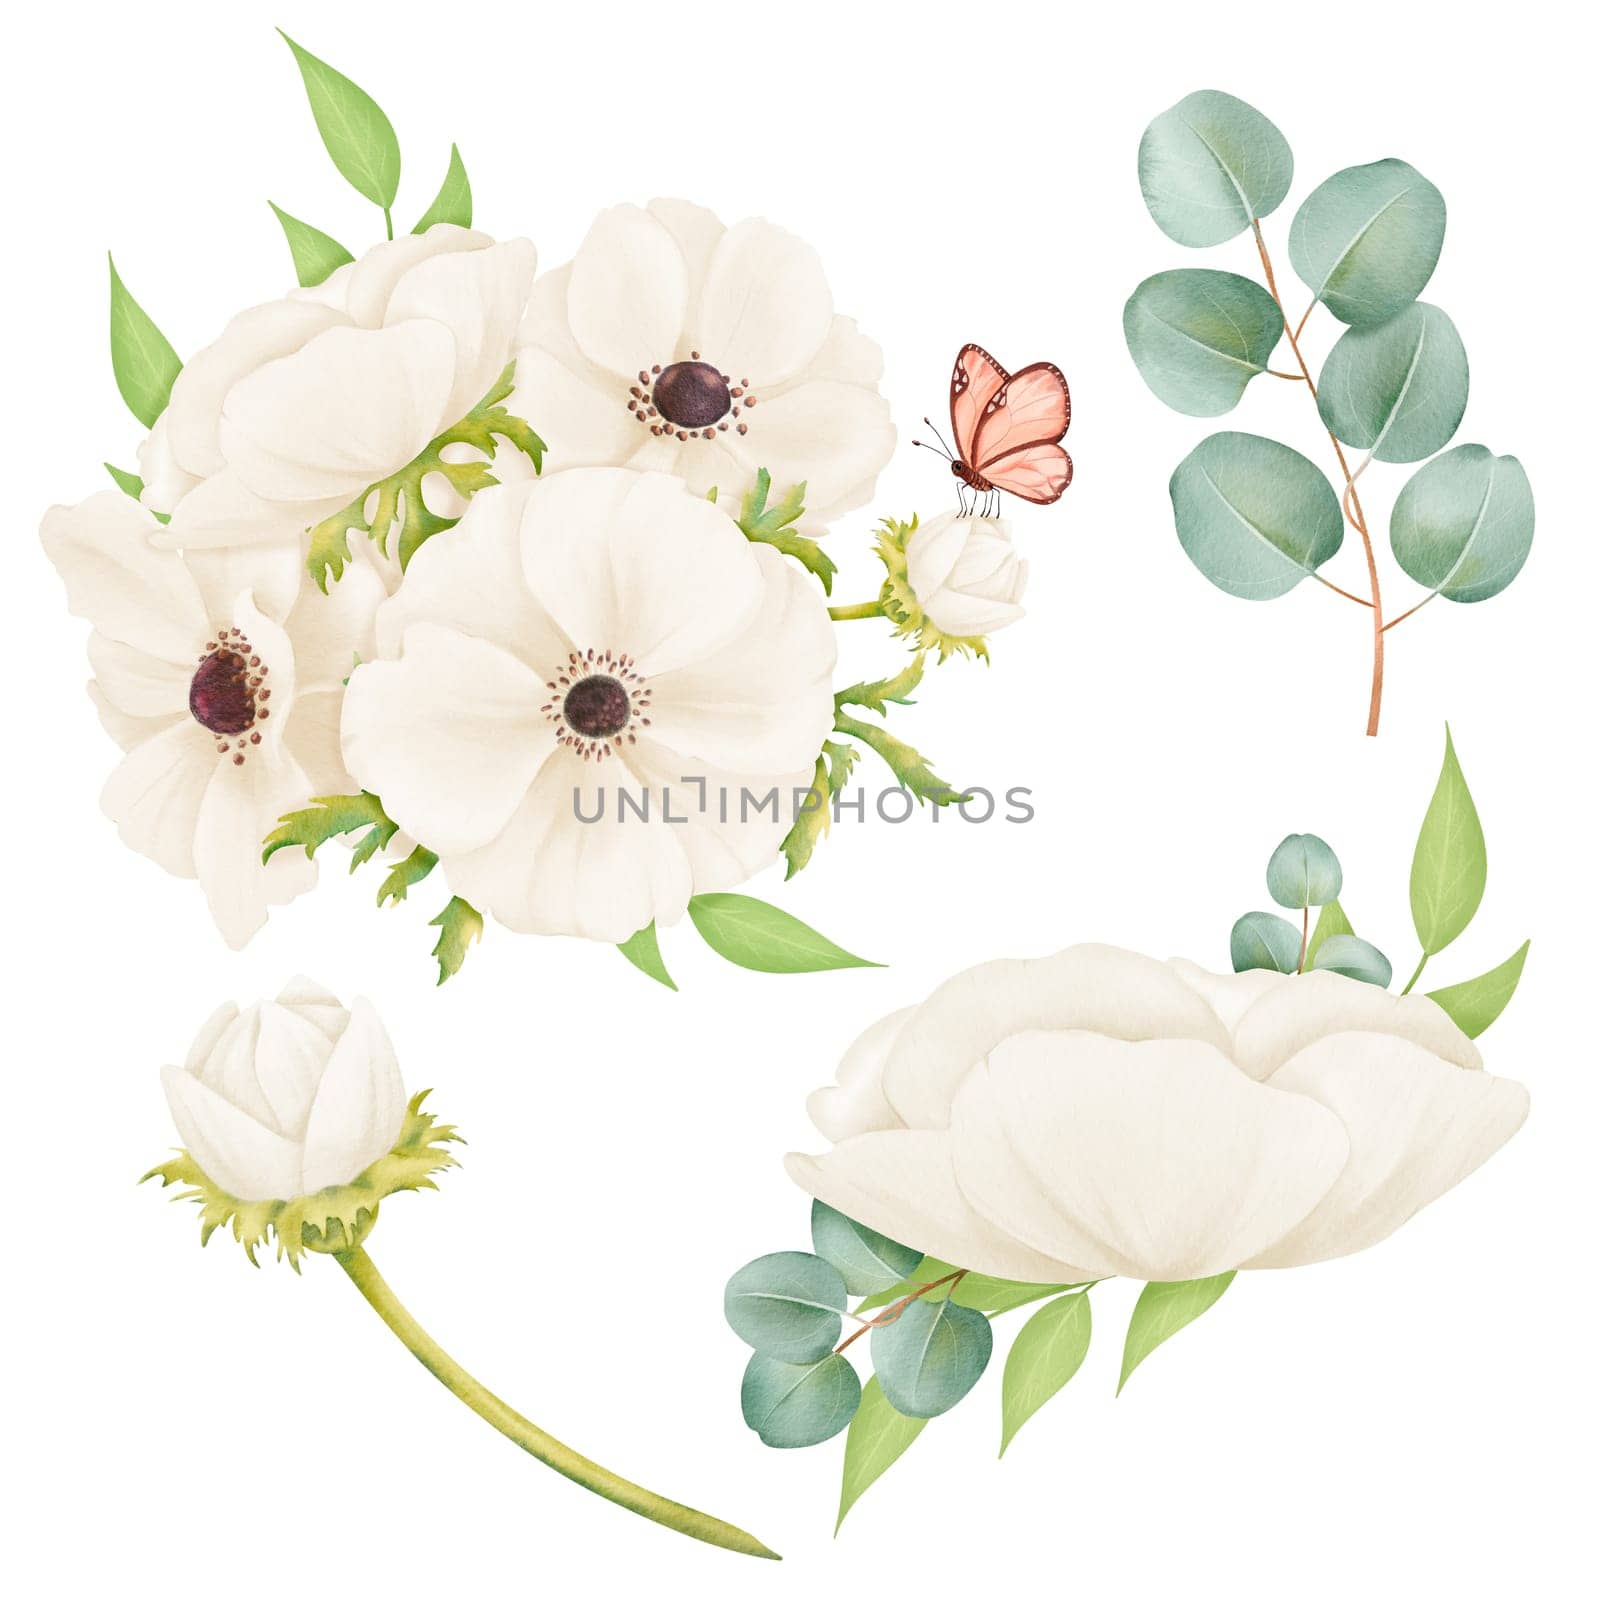 Watercolor set a bouquet of ivory anemones, a sprig of eucalyptus, boutonniere, and butterfly. Ideal for use in stationery, wedding invitations, greeting cards, backgrounds, and floral-themed designs by Art_Mari_Ka